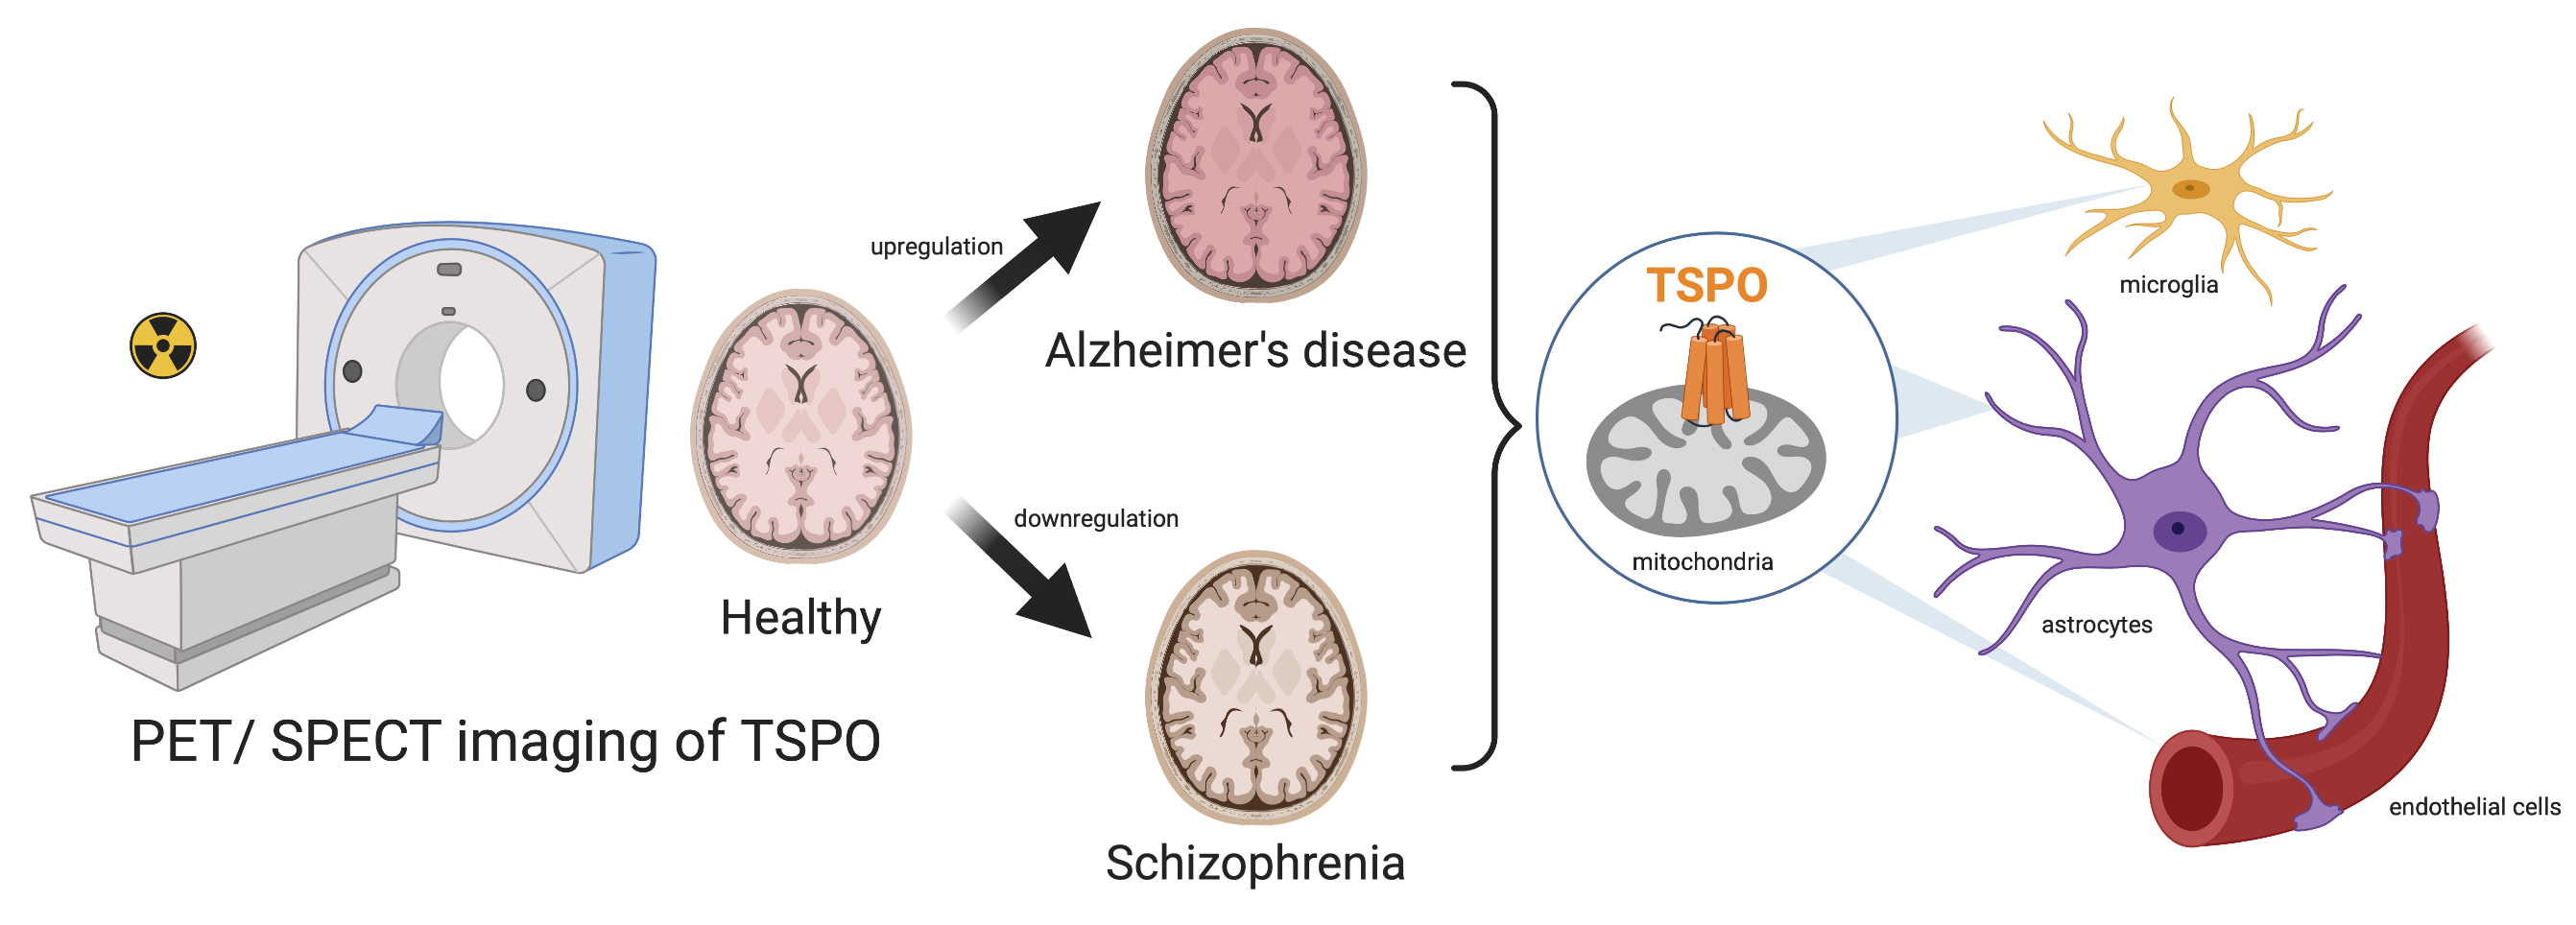 Cells Free Full Text In Vivo Tspo Signal And Neuroinflammation In Alzheimer S Disease Html